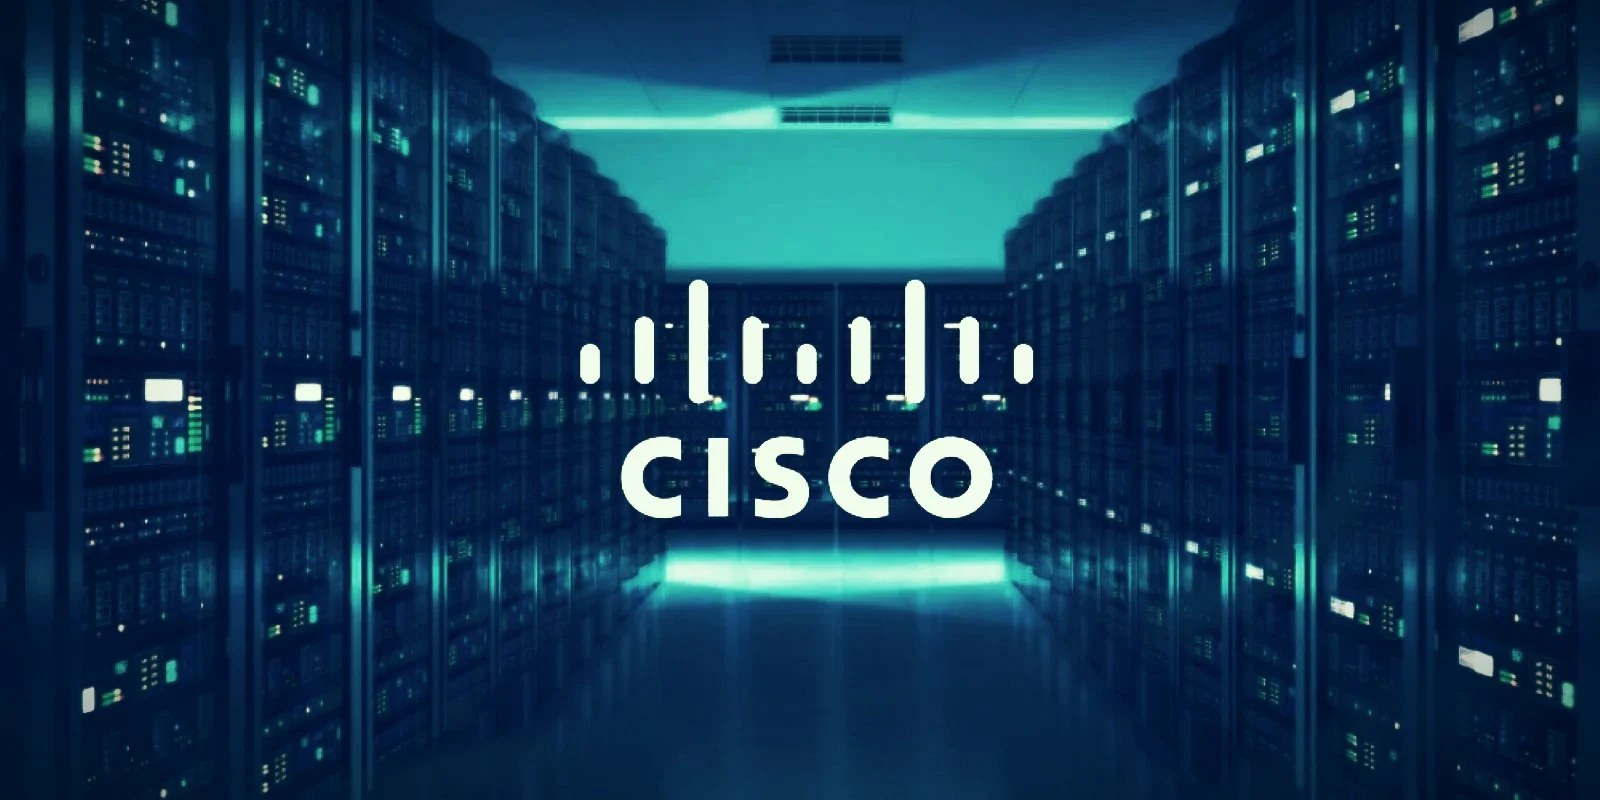 cisco-announces-28b-acquisition-of-splunk-expanding-its-security-and-observability-capabilities